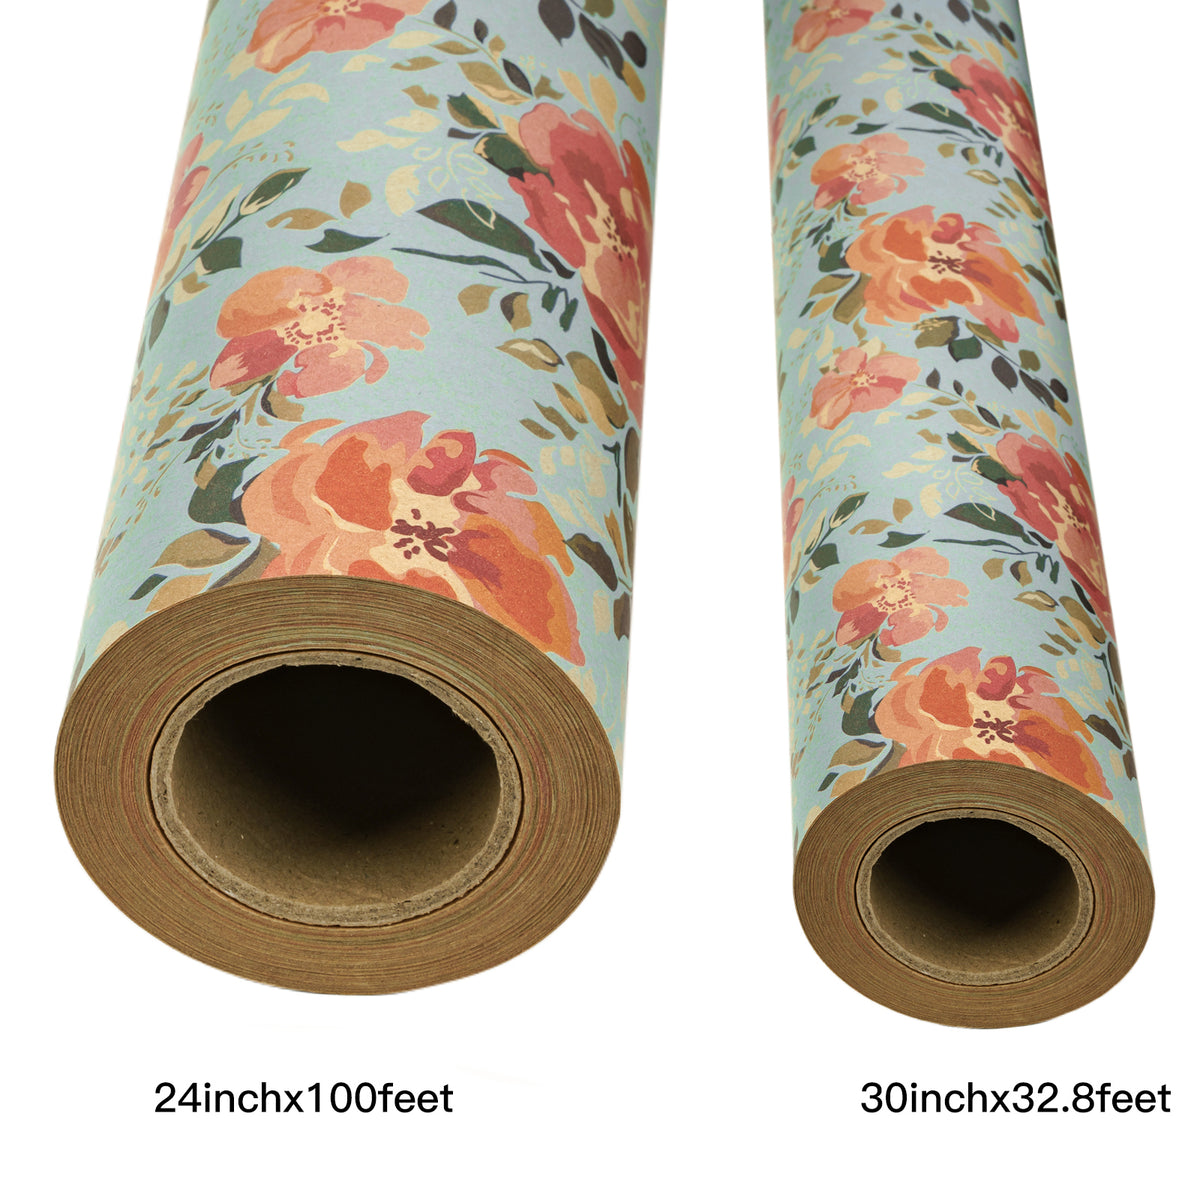 solacol Vintage Christmas Wrapping Paper Christmas Gift Paper Gift Paper  Vintage Floral Paper Kraft Paper Wrapping Paper Vintage Wrapping Paper  Christmas Christmas Wrapping Paper Rolls 